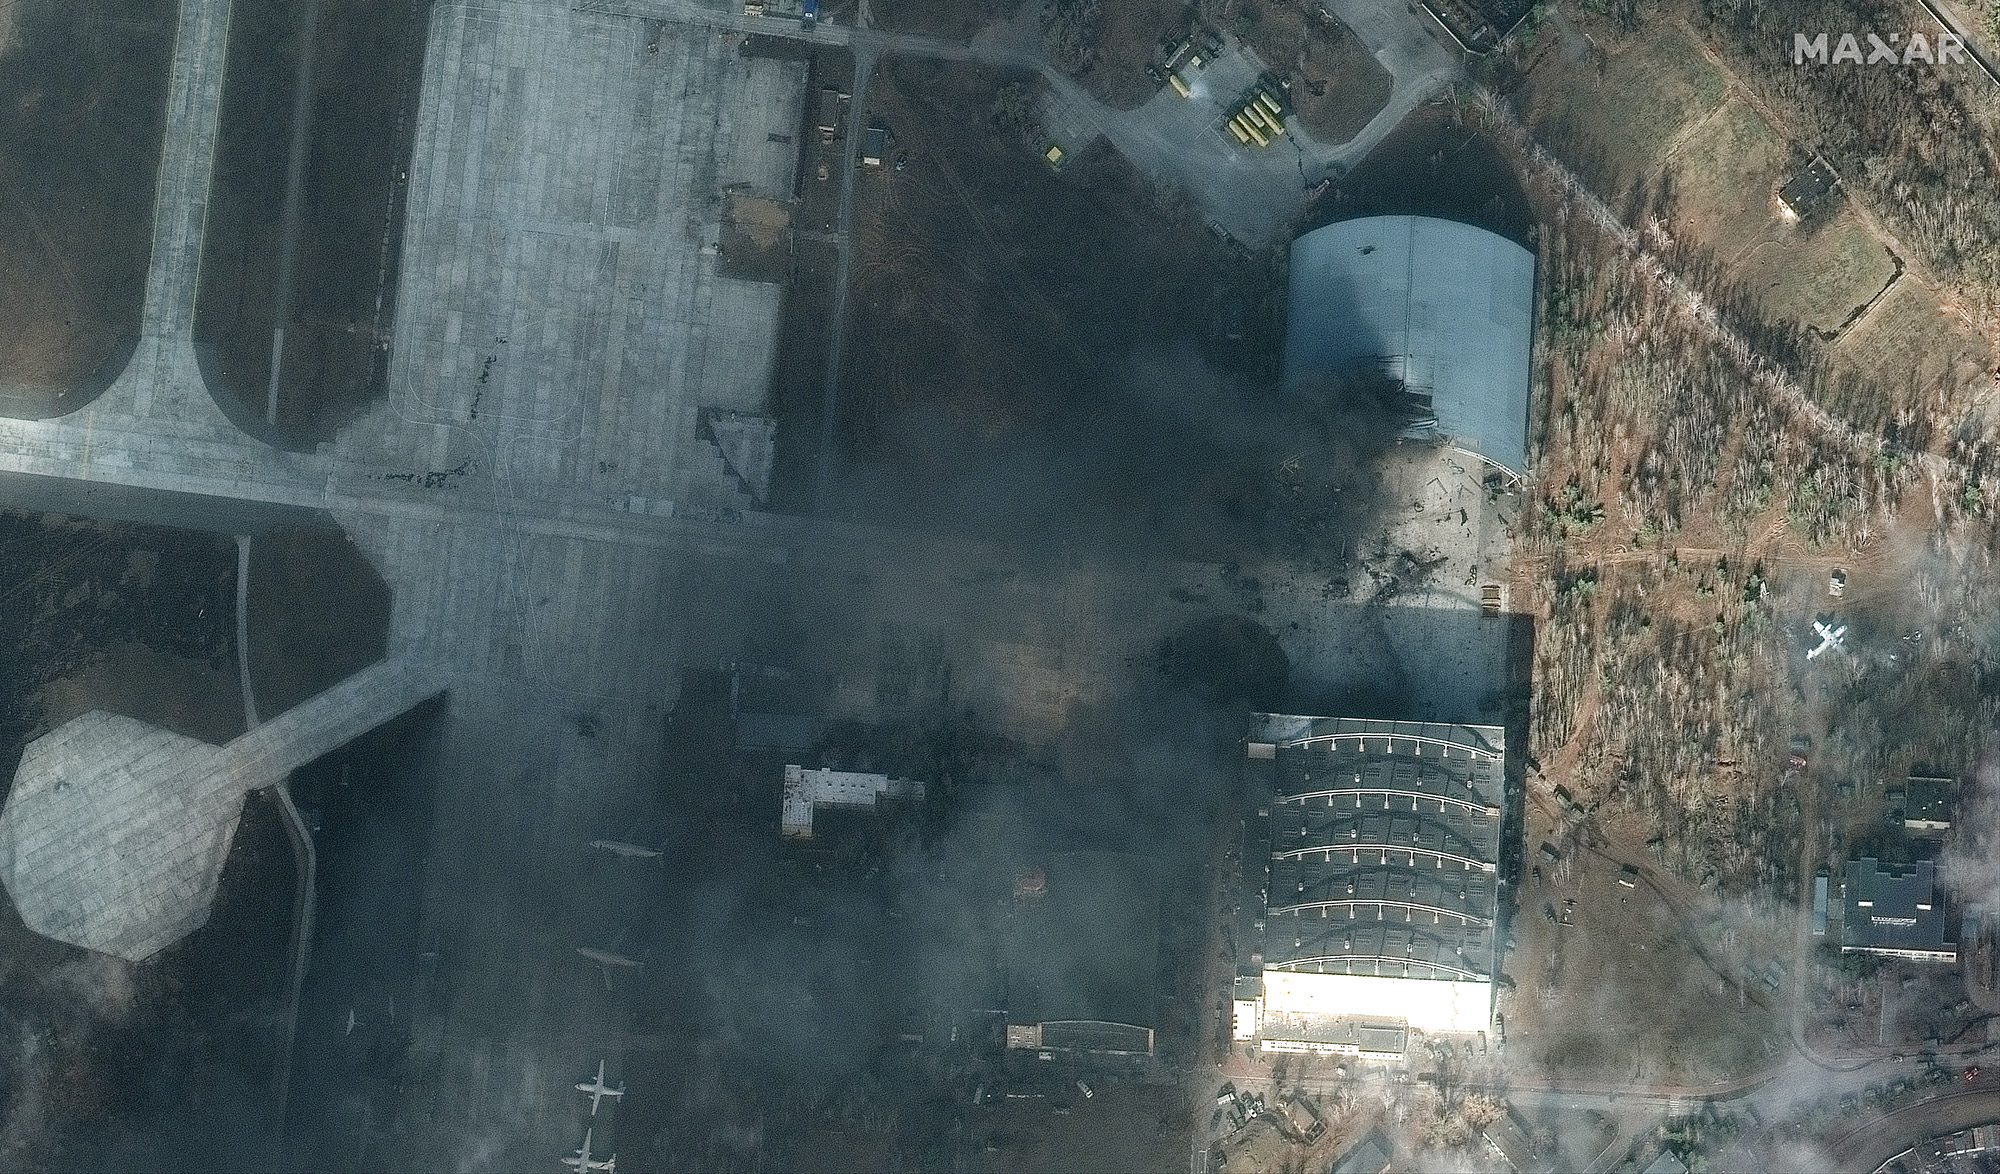 Satellite images from Maxar Technologies show significant damage to part of the hangar at the Hostomel Air Base where the AN-225 is stored.